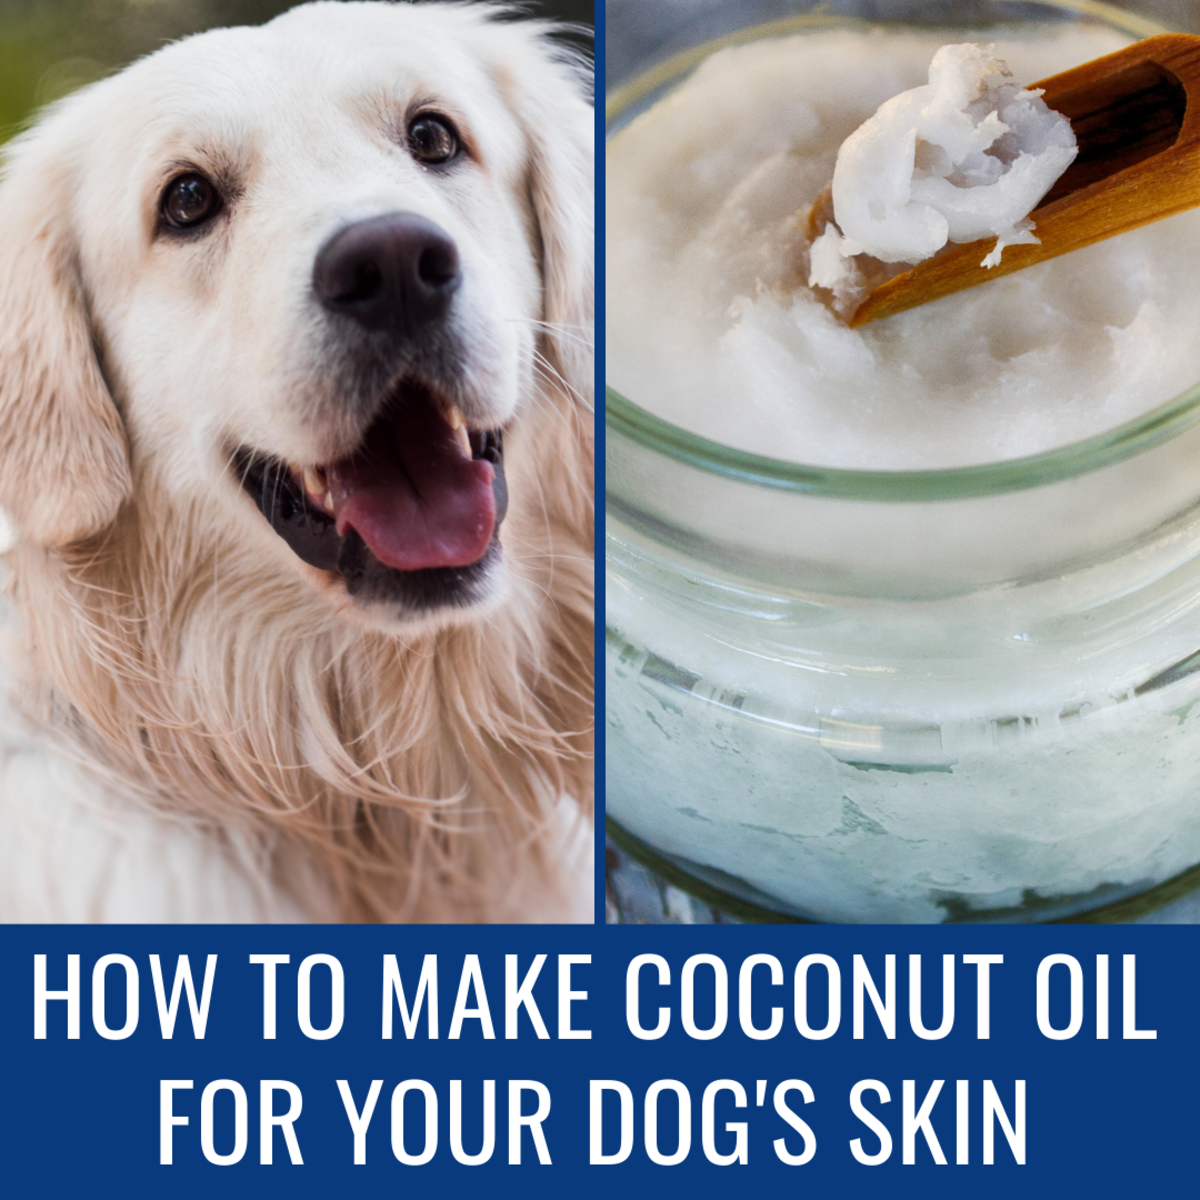 Homemade coconut oil is best for your dog.